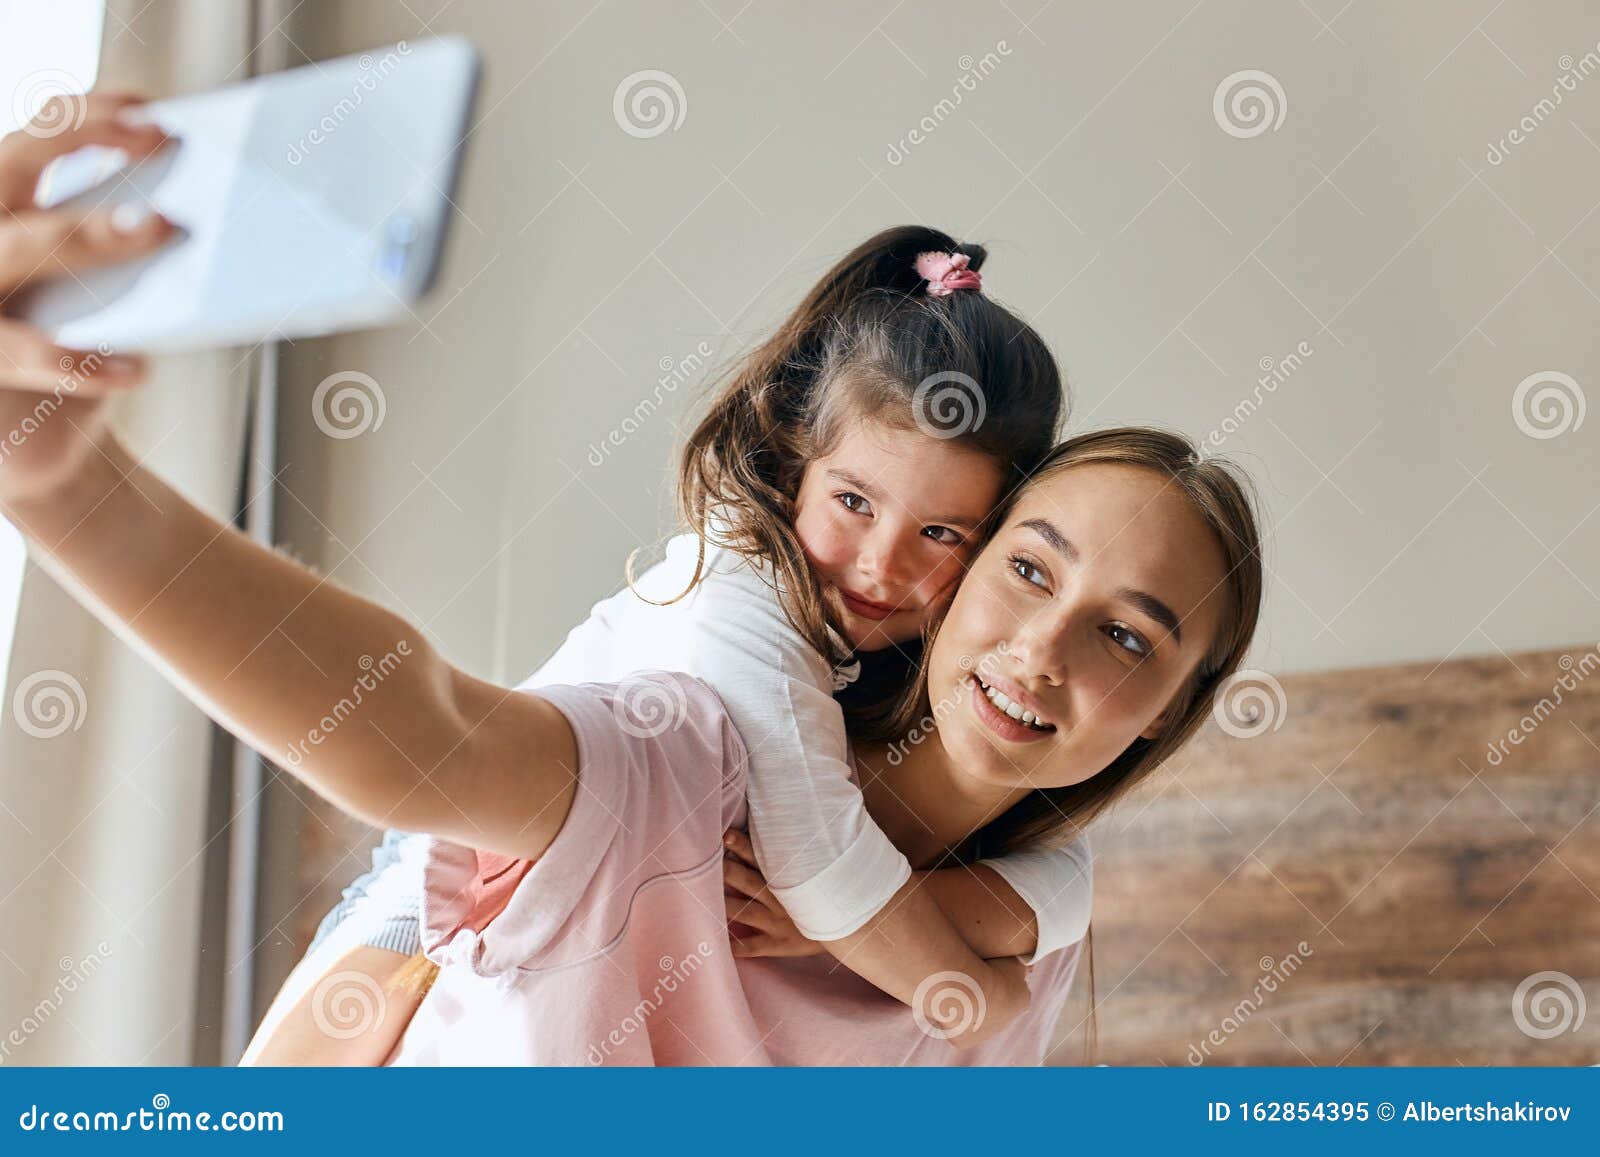 Cute Young Daughter on a Piggyback Ride Stock Image - Image of ...